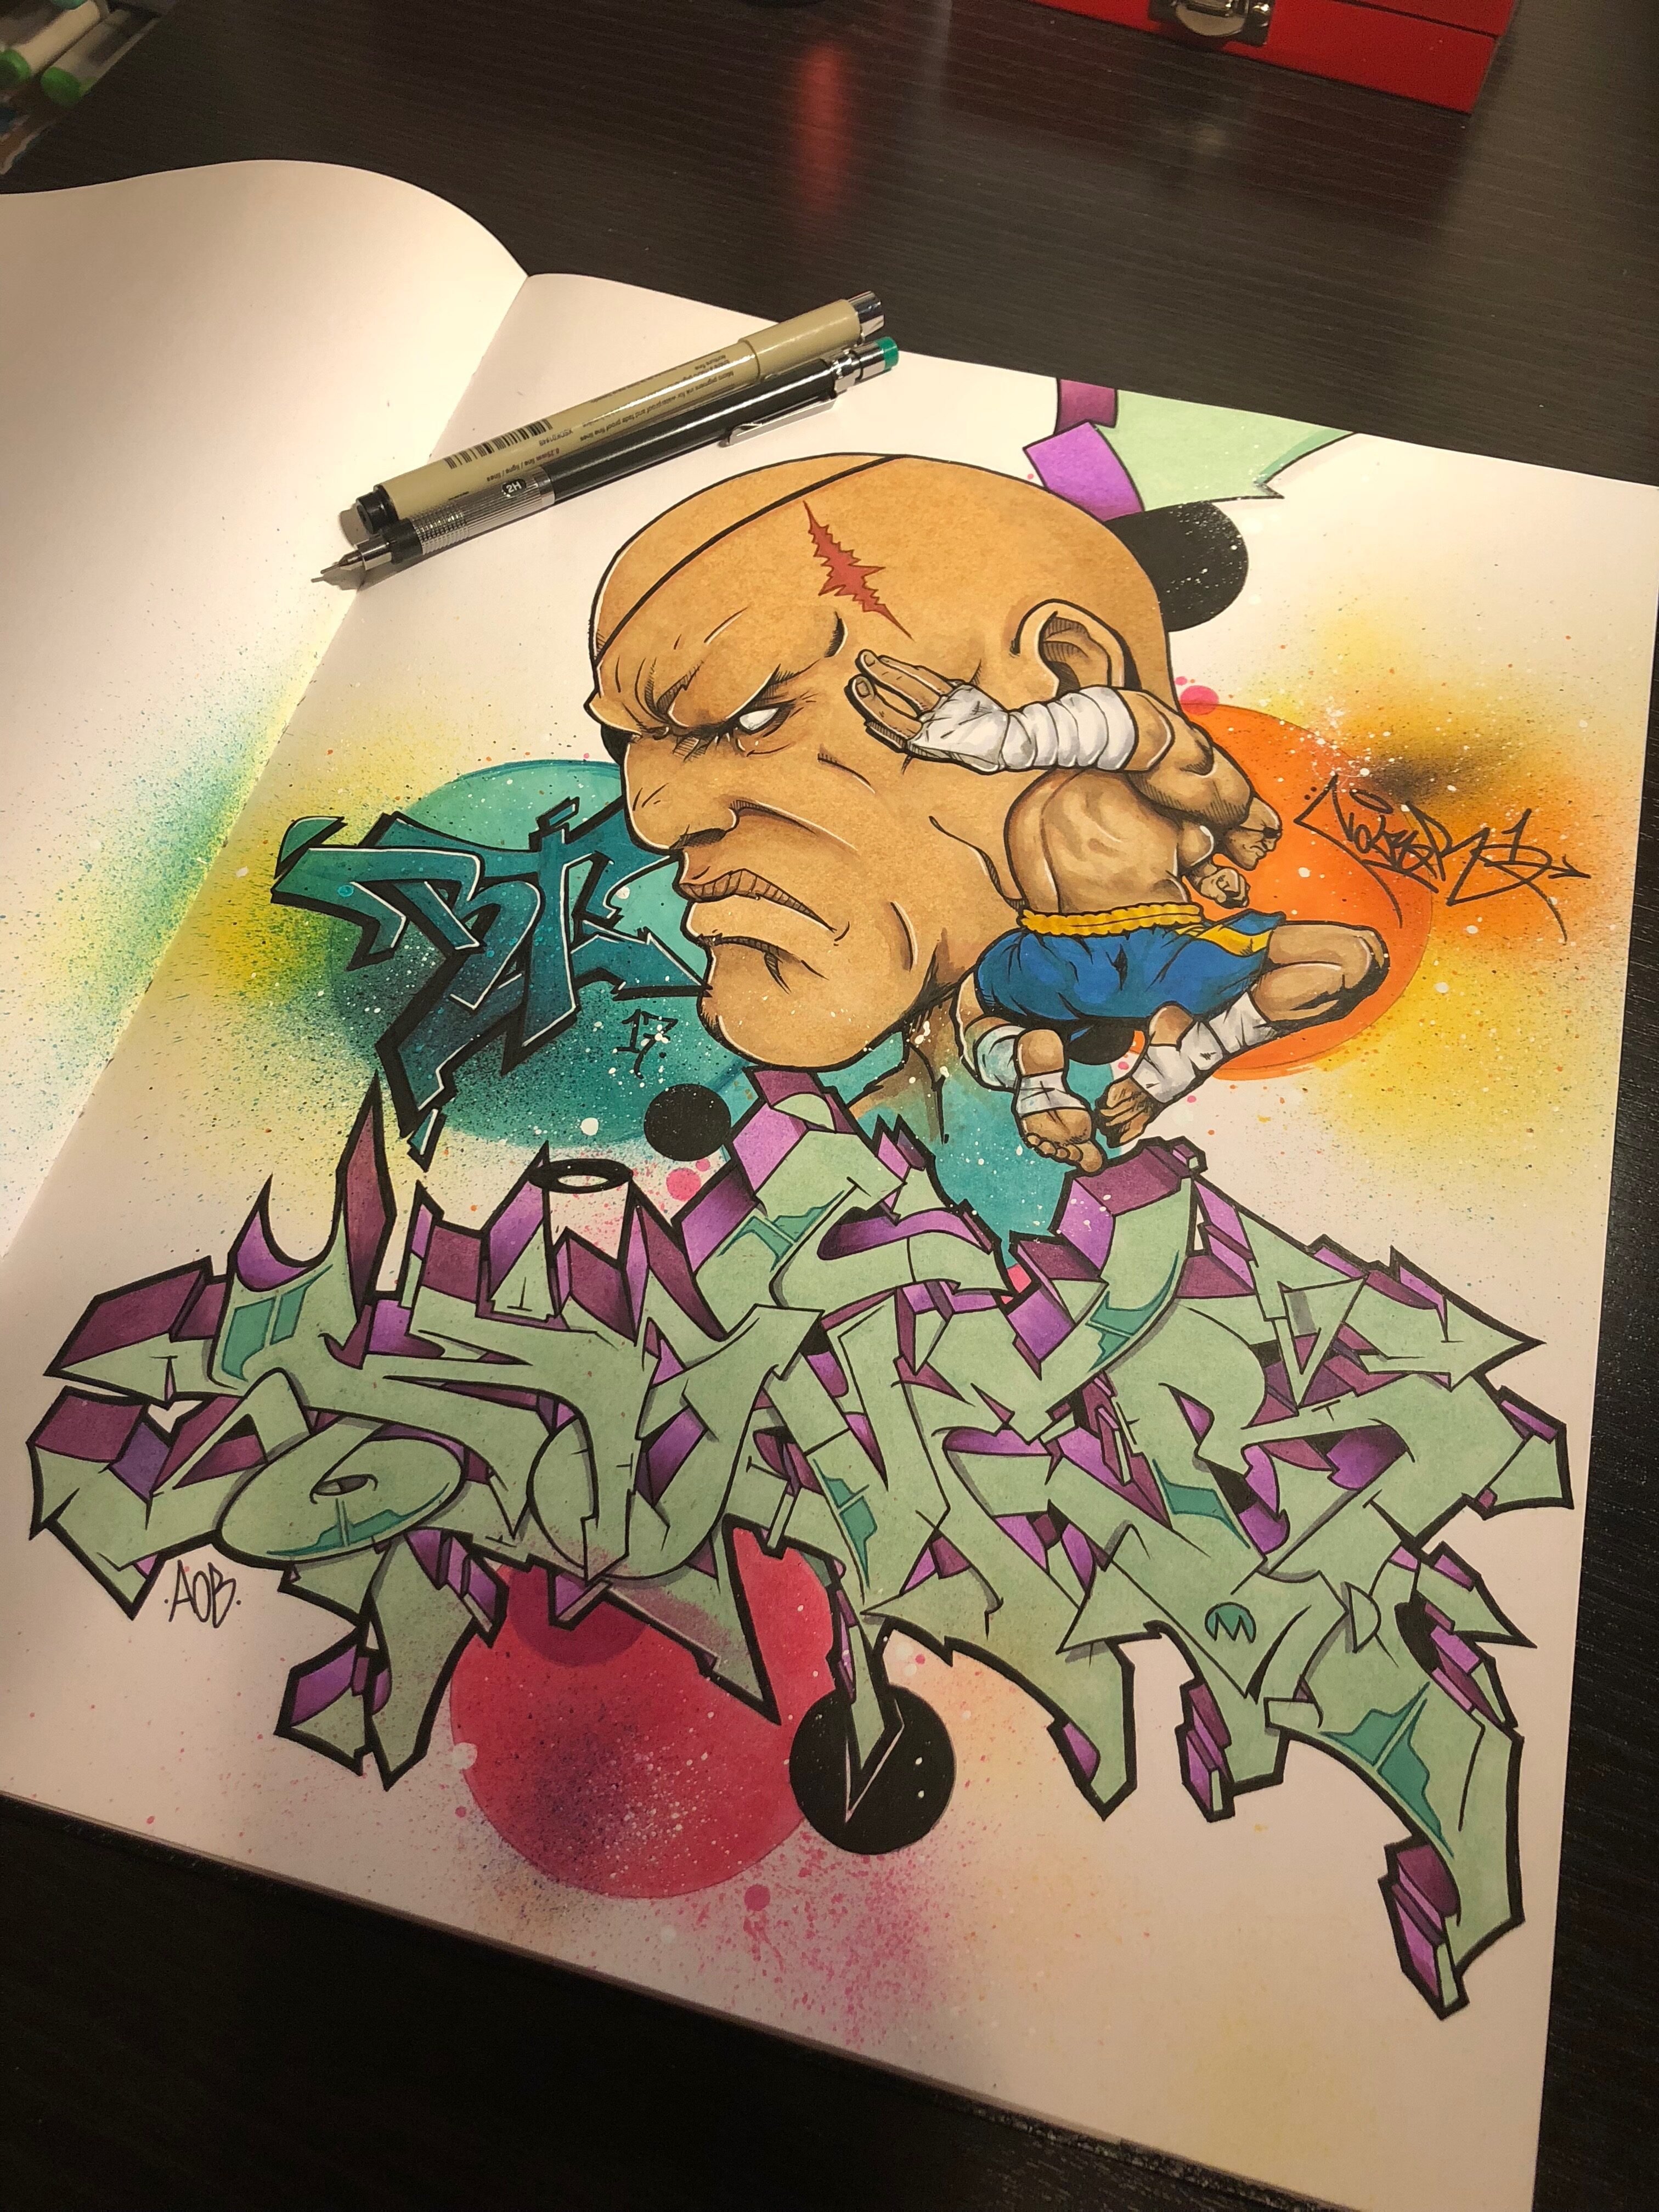 Sagat by Nover, Pens and Markers in Blackbook, 2017.